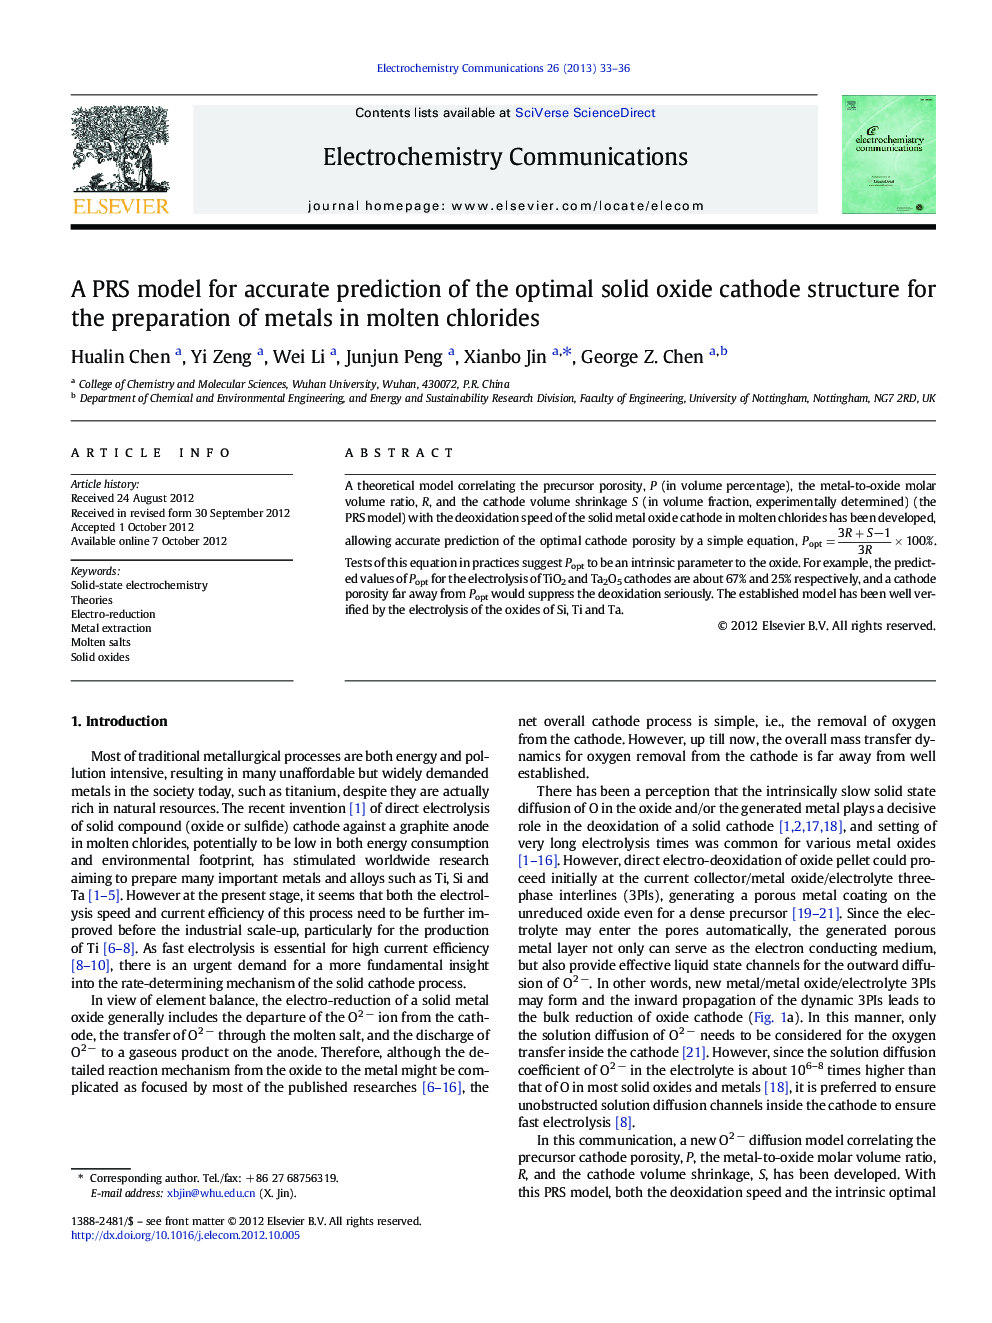 A PRS model for accurate prediction of the optimal solid oxide cathode structure for the preparation of metals in molten chlorides